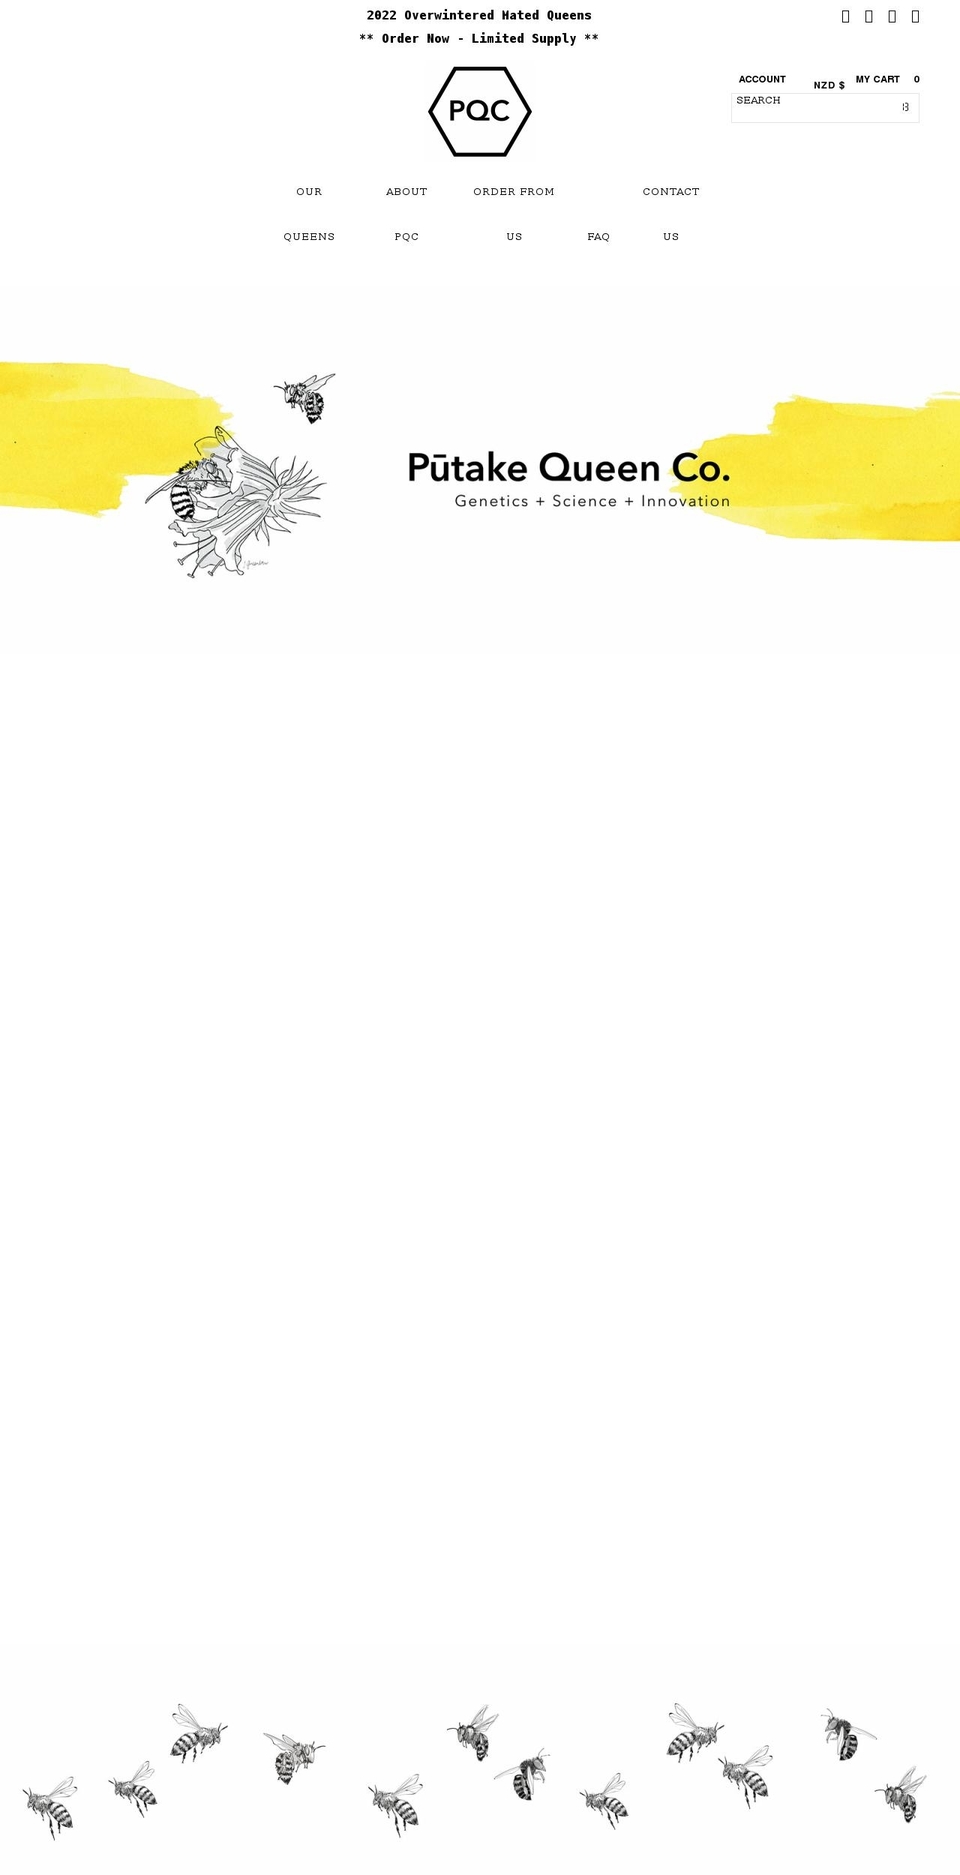 QUEEN Shopify theme site example putake.co.nz